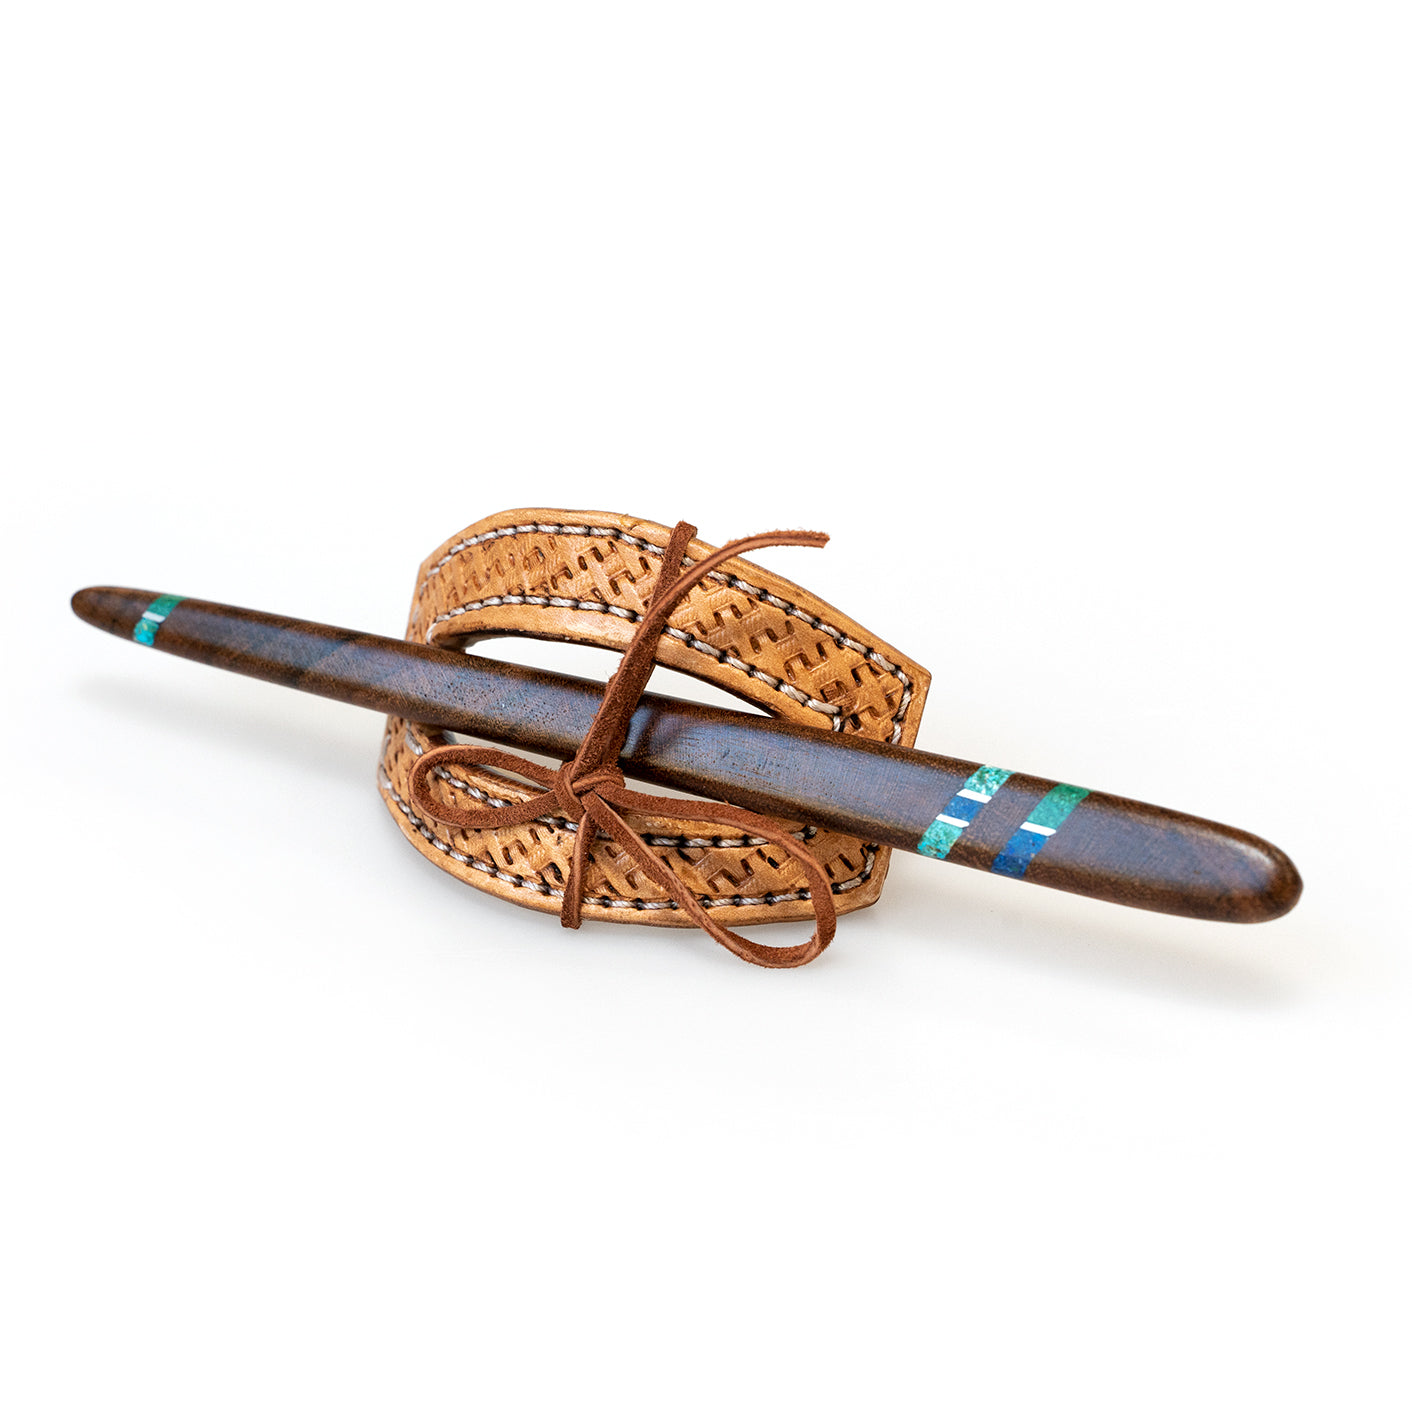 Barn Dance Basket Weave Leather Hair Barrette with Turquoise Inlay Natural Wood Stick